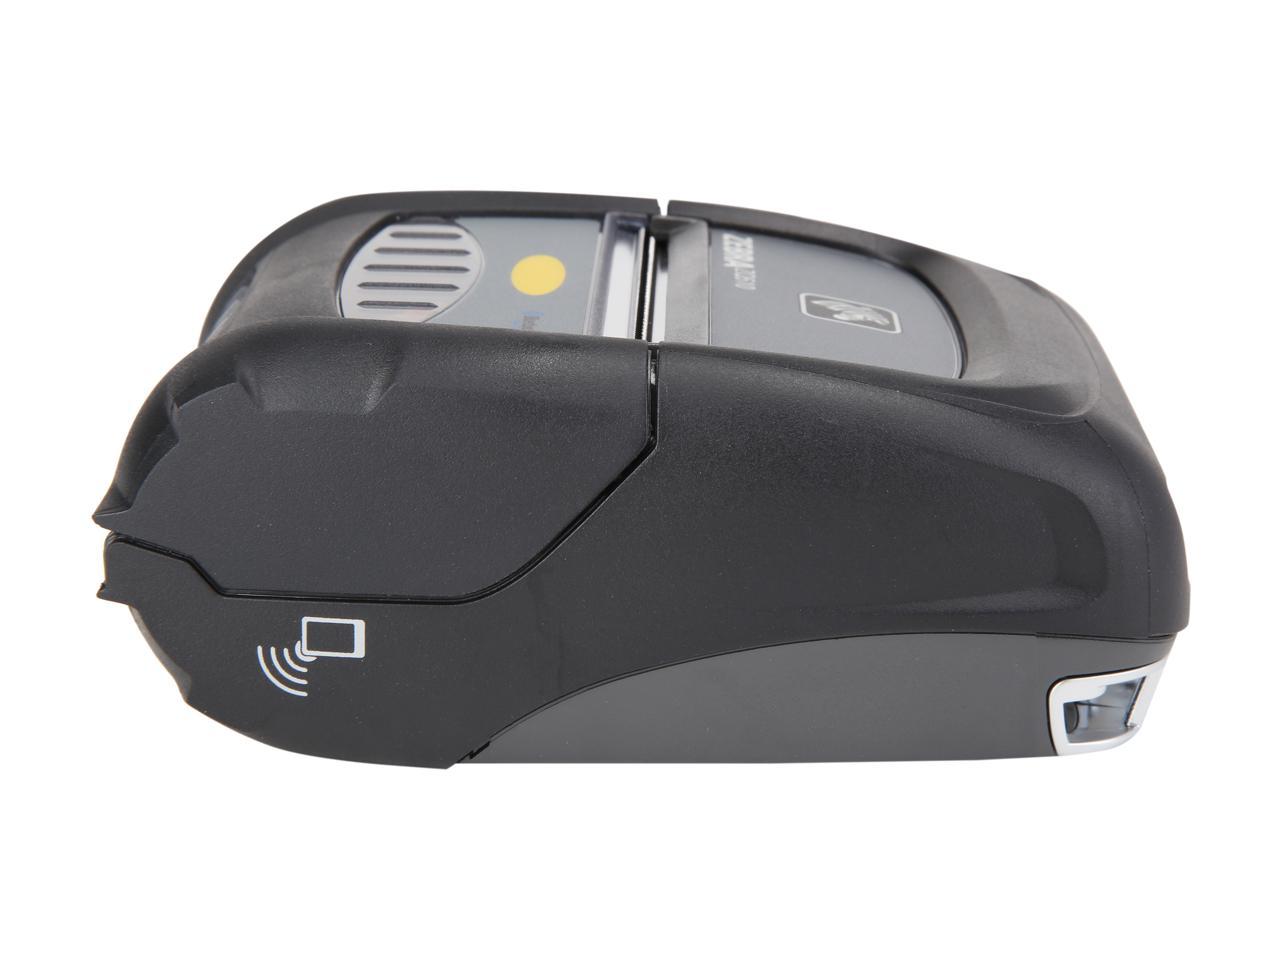 Zebra Zq510 3 Mobile Direct Thermal Receipt And Label Printer 203 Dpi Bluetooth 40 Linered 4444